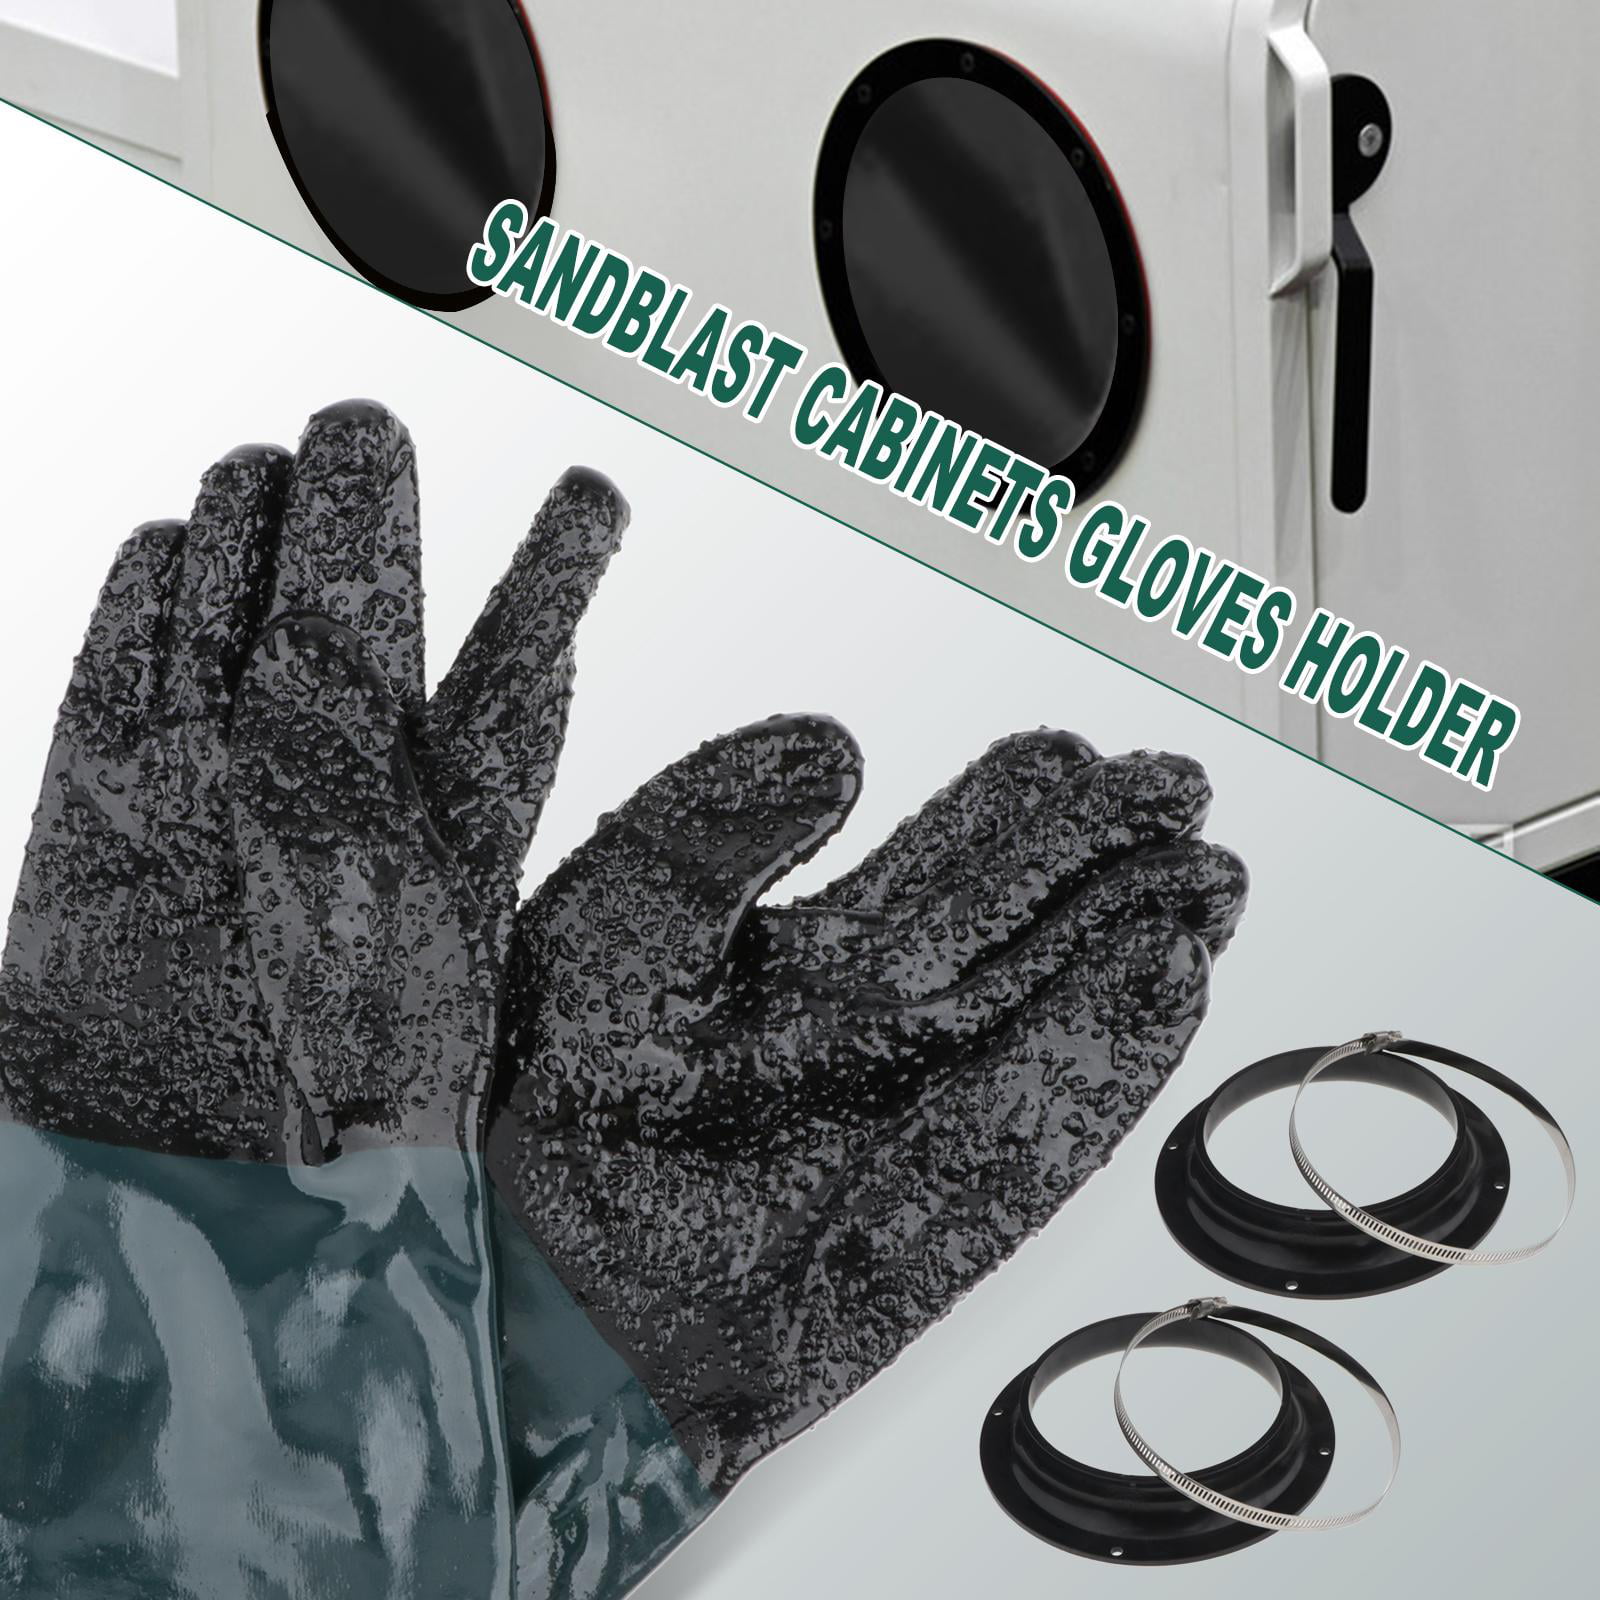 Details about   Pairs Heavy Duty Sandblasting Gloves For Sand Blast Cabinet W/Holder Clamps 